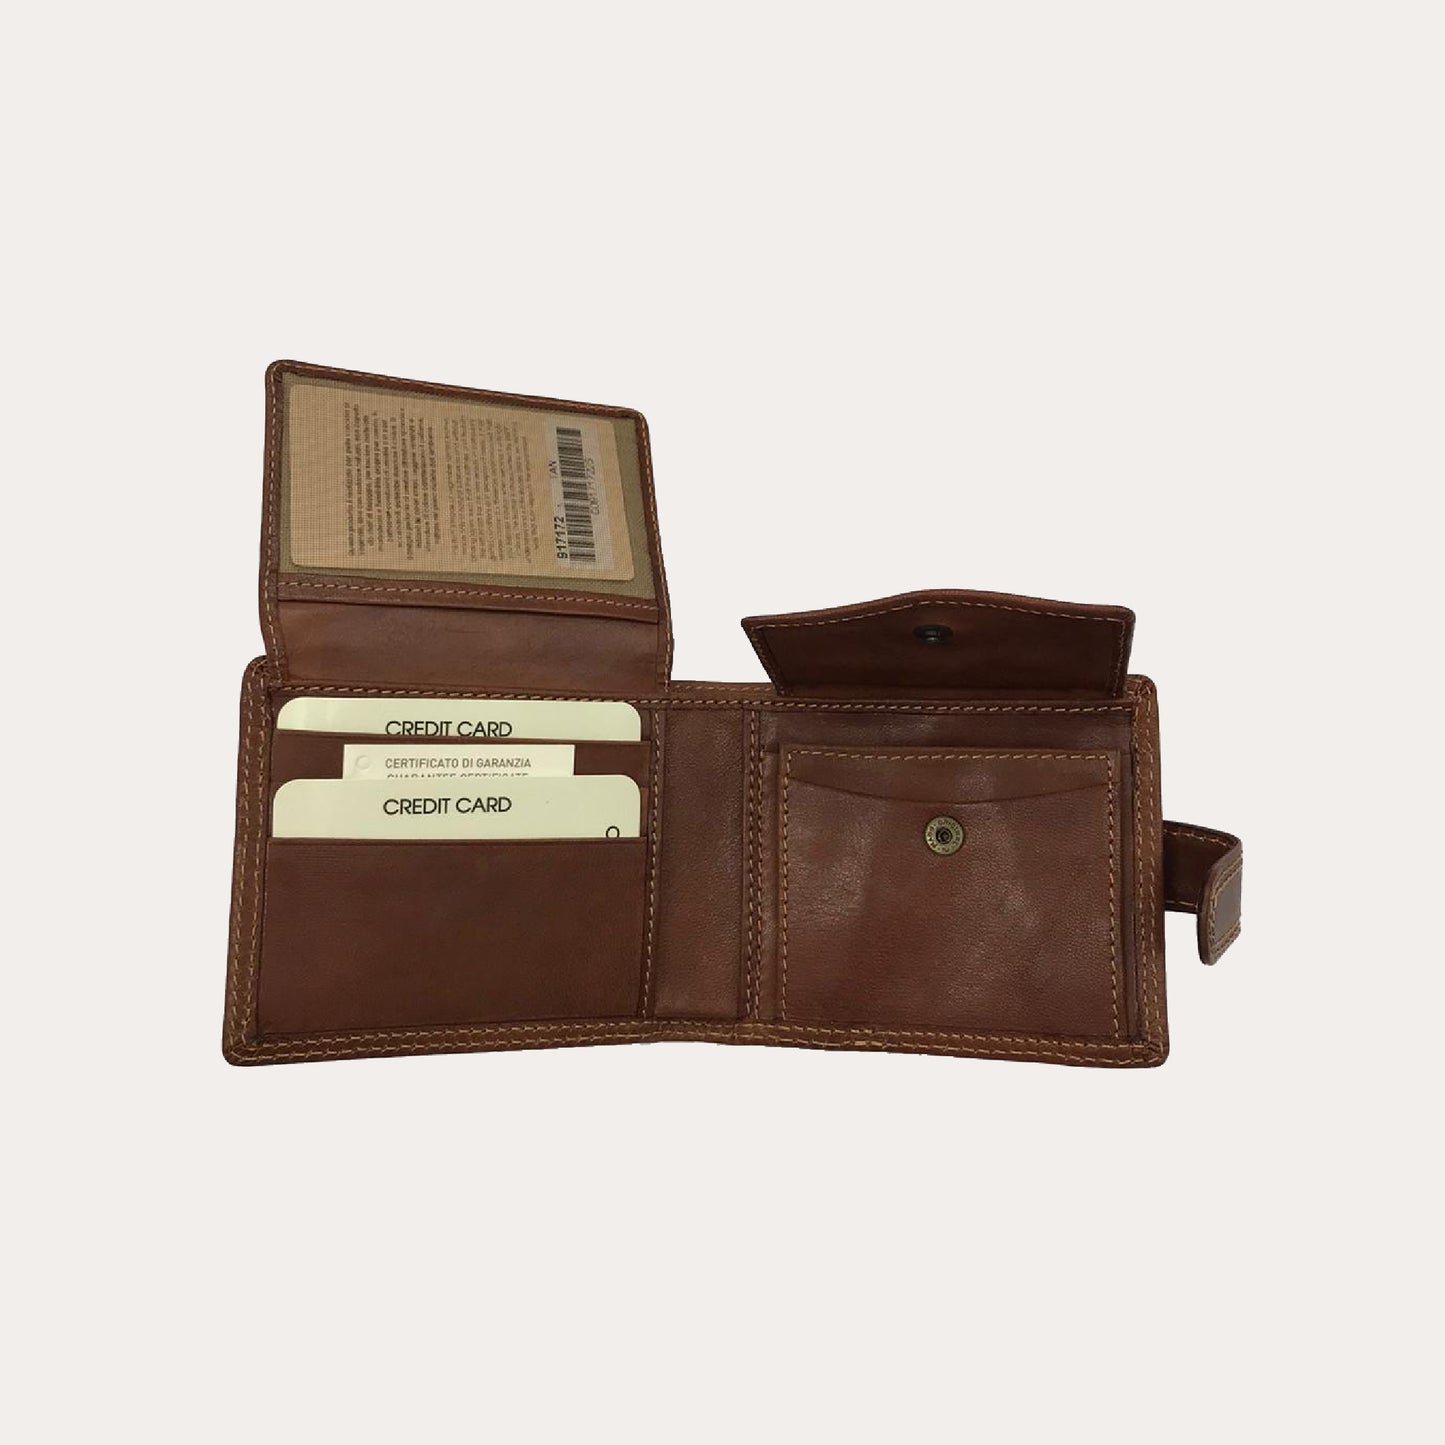 Gianni Conti Tan Leather Wallet-7 Credit Card/Coin Section